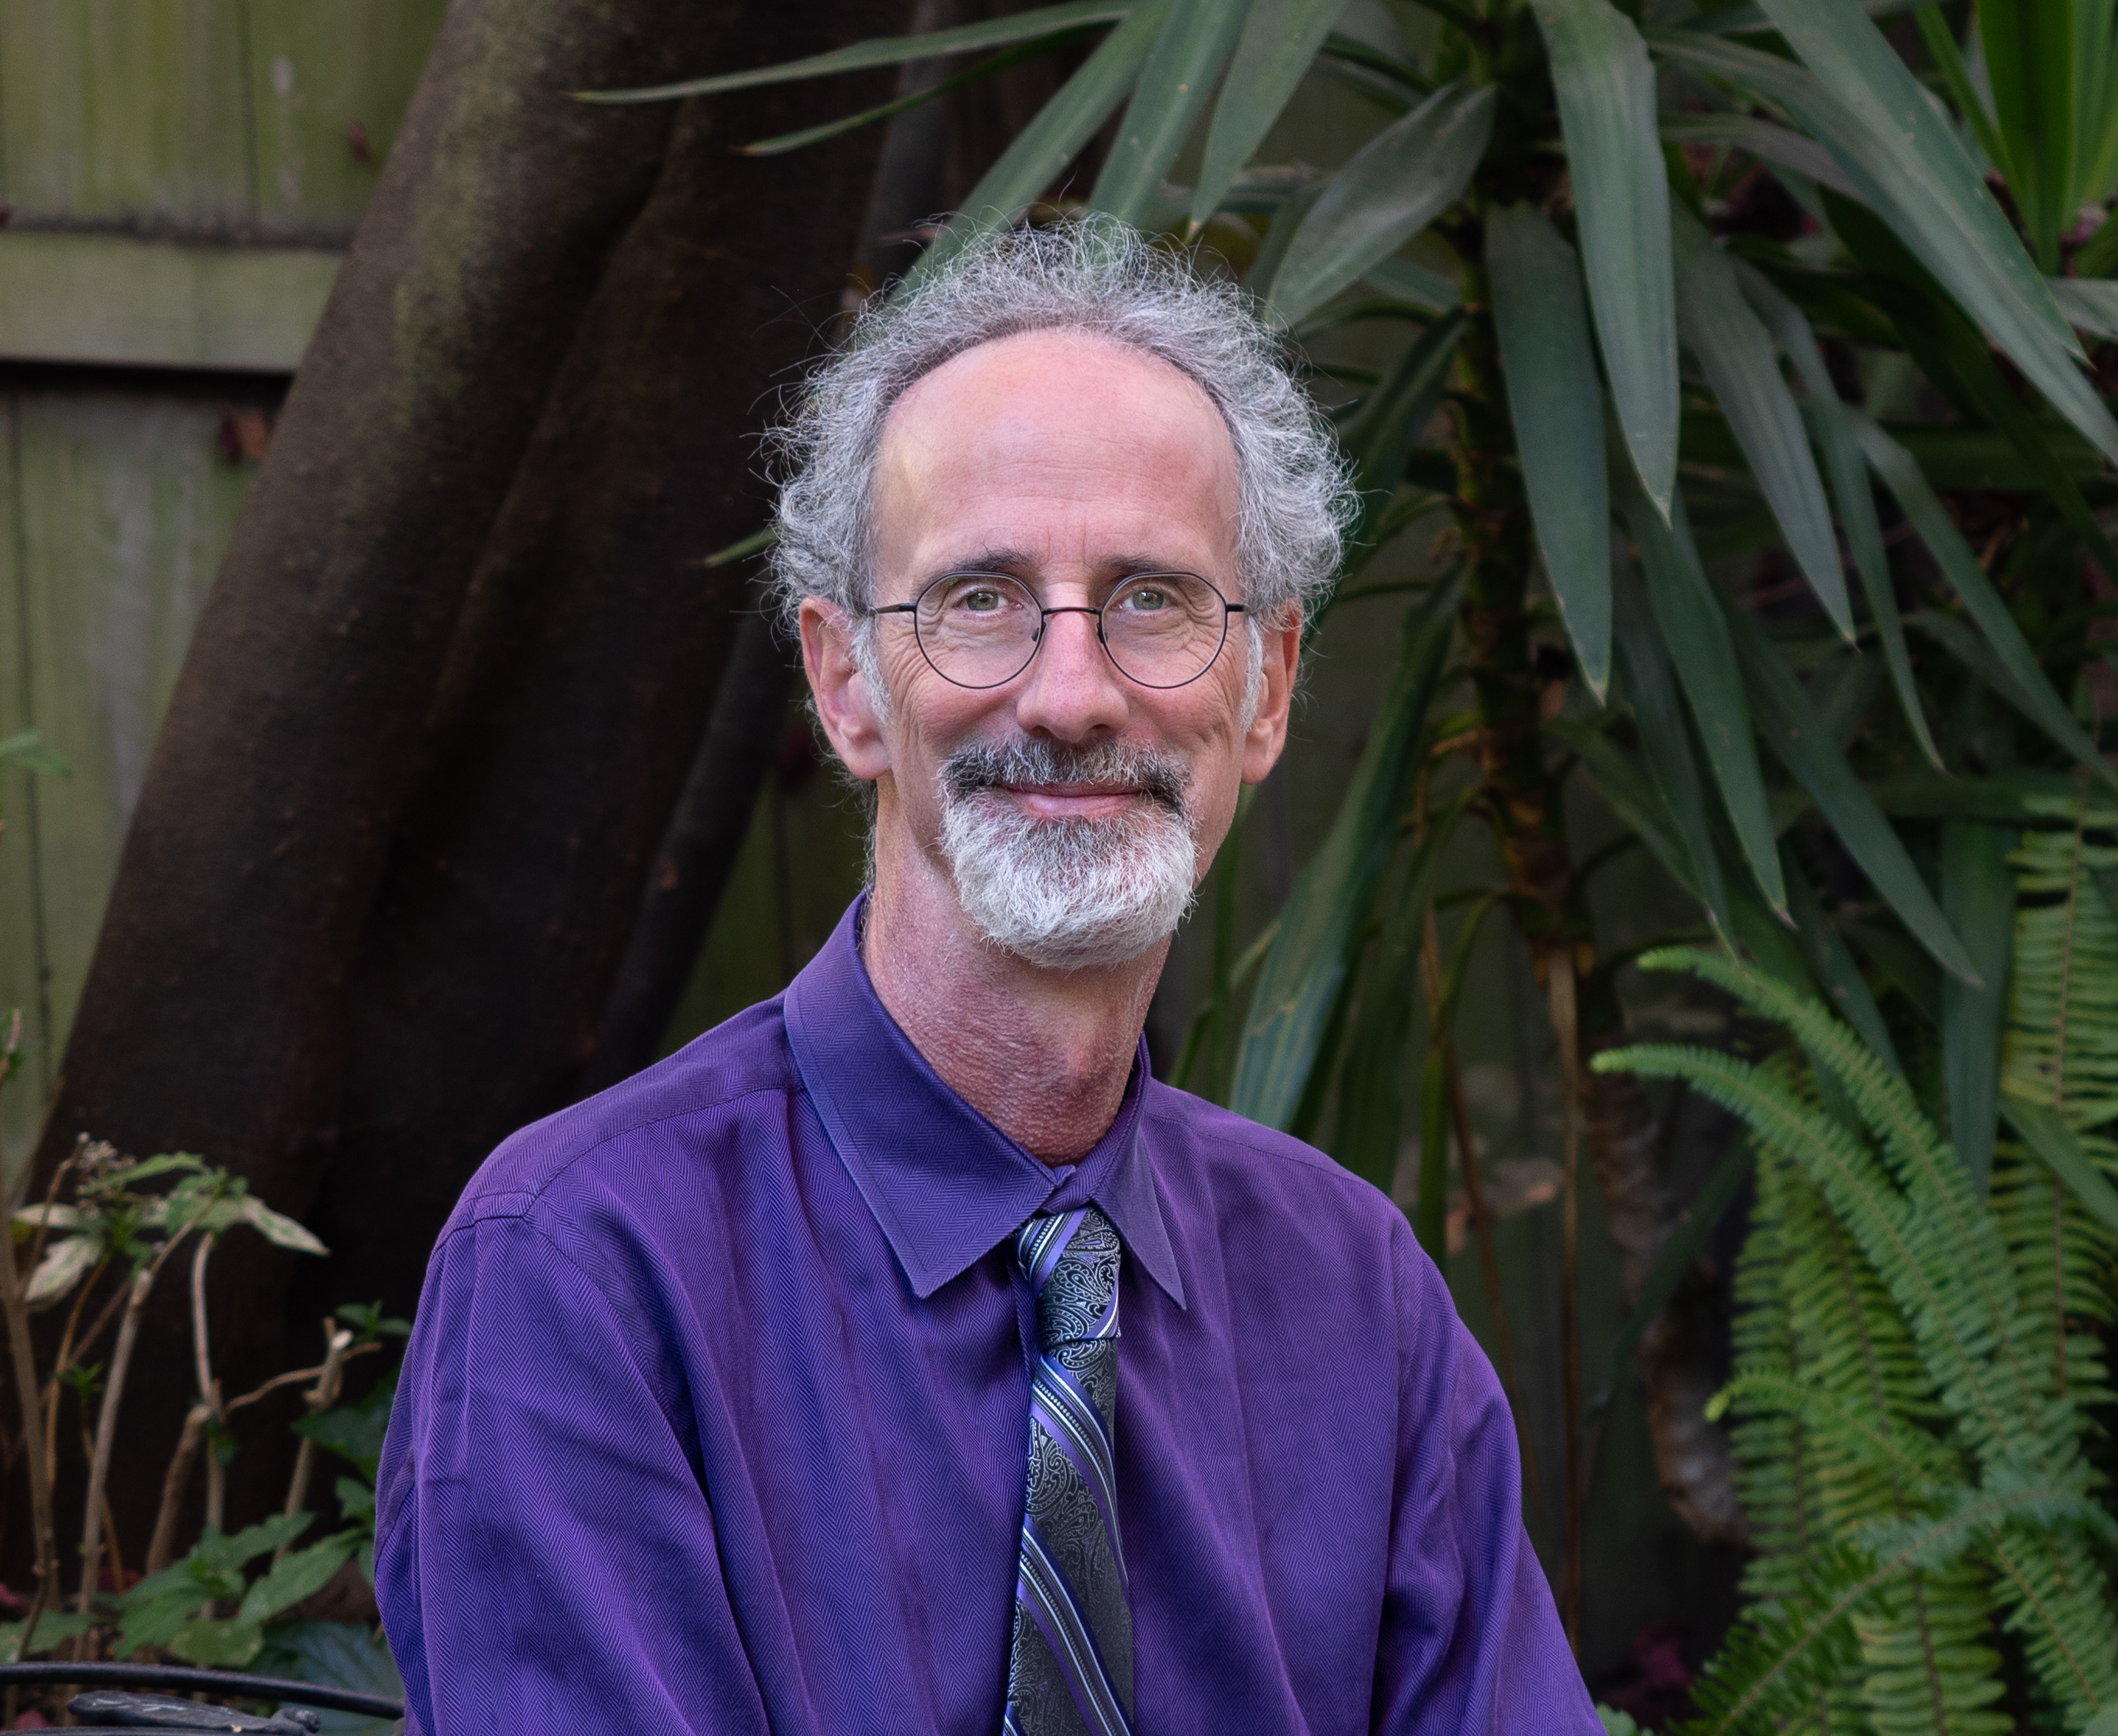 Peter Gleick, Author: "The Three Ages of Water." Co-founder, Senior Fellow of the Pacific Institute